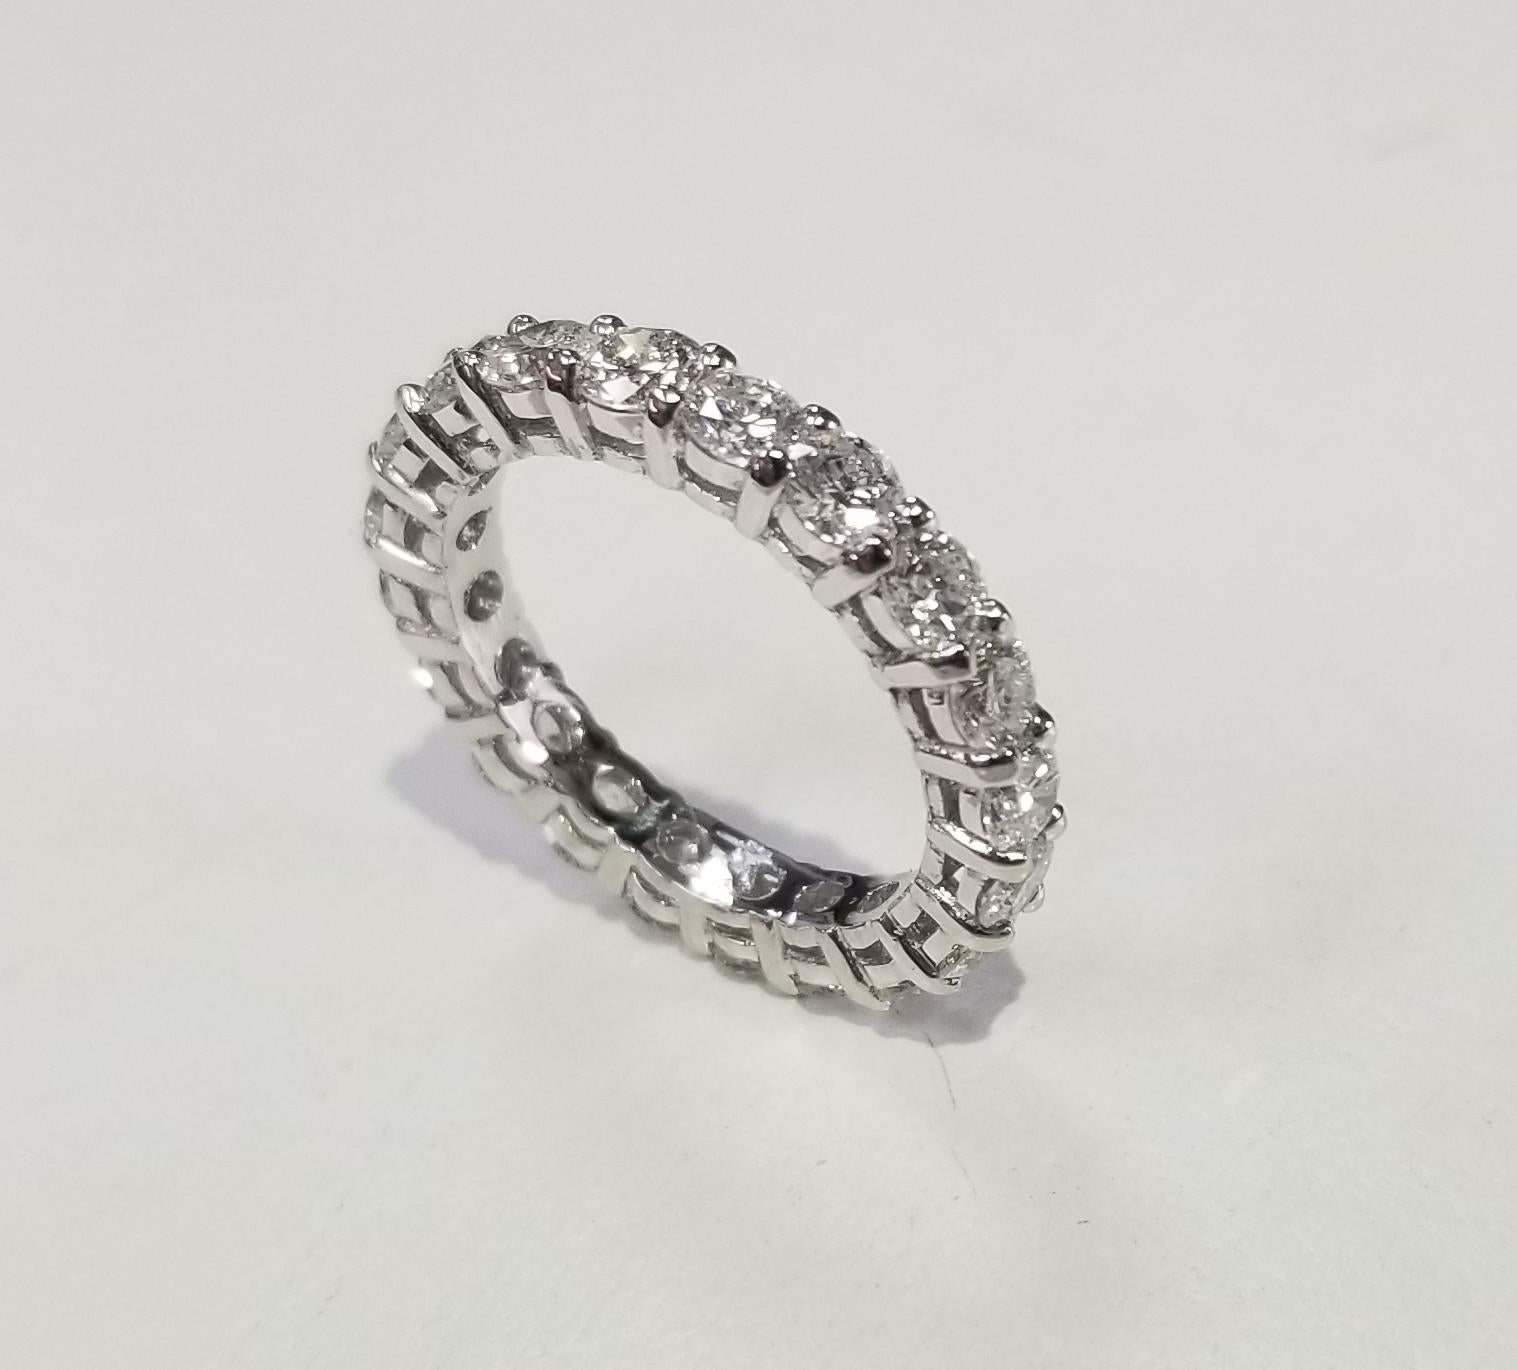 14k white gold diamond eternity ring with shared prongs
Specifications:
    diamonds: 20 PCS ROUND CUT DIAMONDS
    carat total weight: APPROX 2.50 CT.
    color: G
    clarity: VS2
    metal: GOLD
    type: WEDDING BAND ring
    weight:  2.8 Grams
